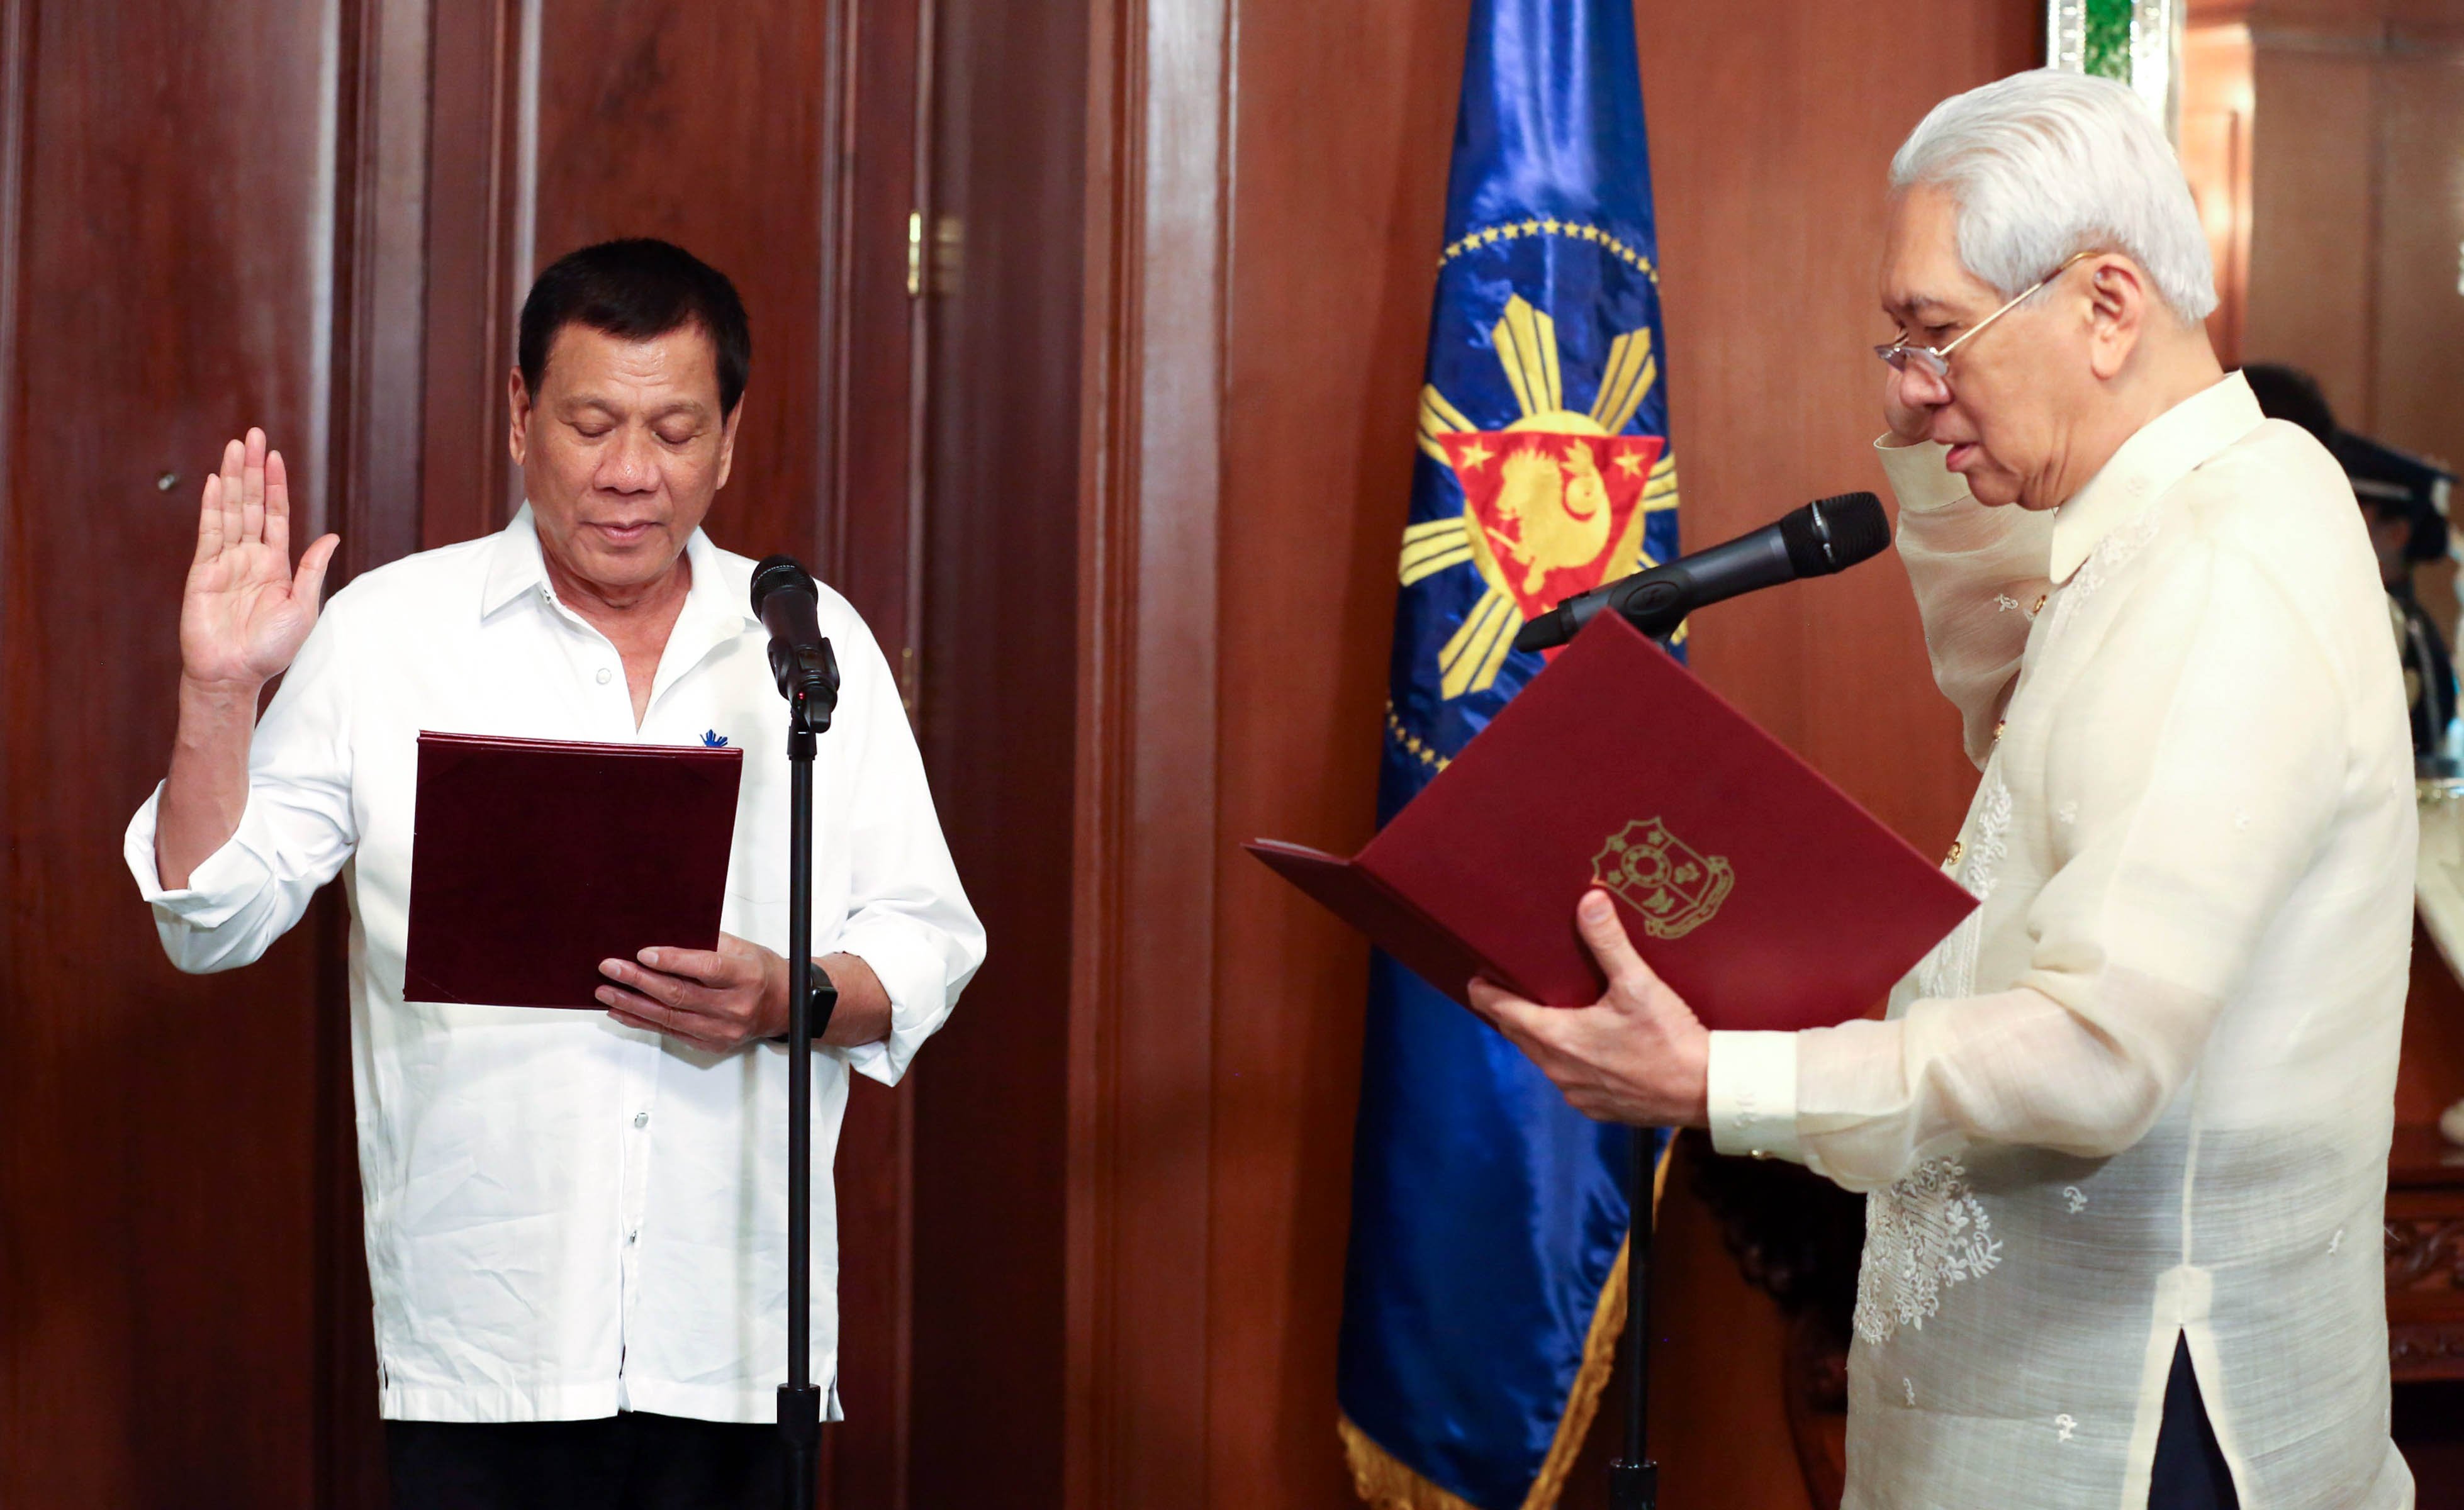 Pres. Duterte administers oath to newly-appointed SC Associate Justice Martires